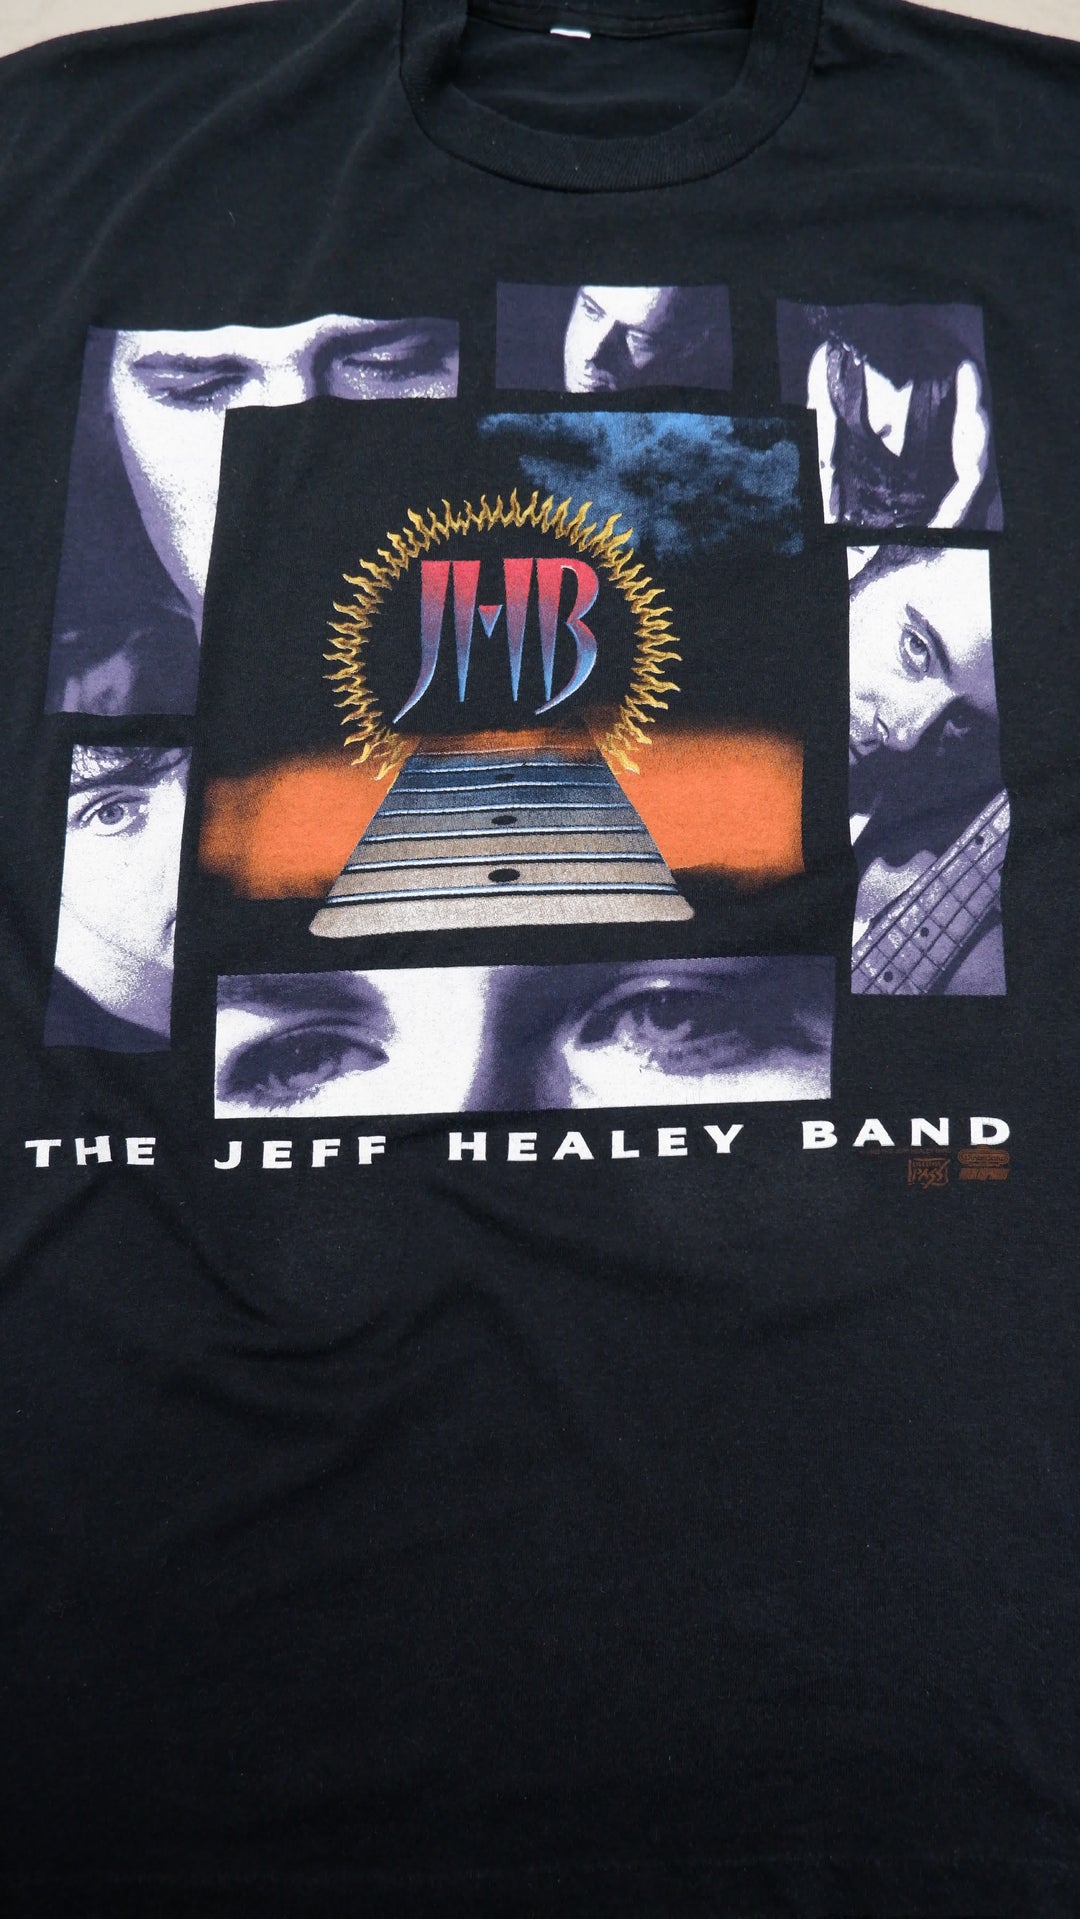 Vintage The Jeff Healey Band 'Feel This' 1993 Tour T-shirt, Single Stitch